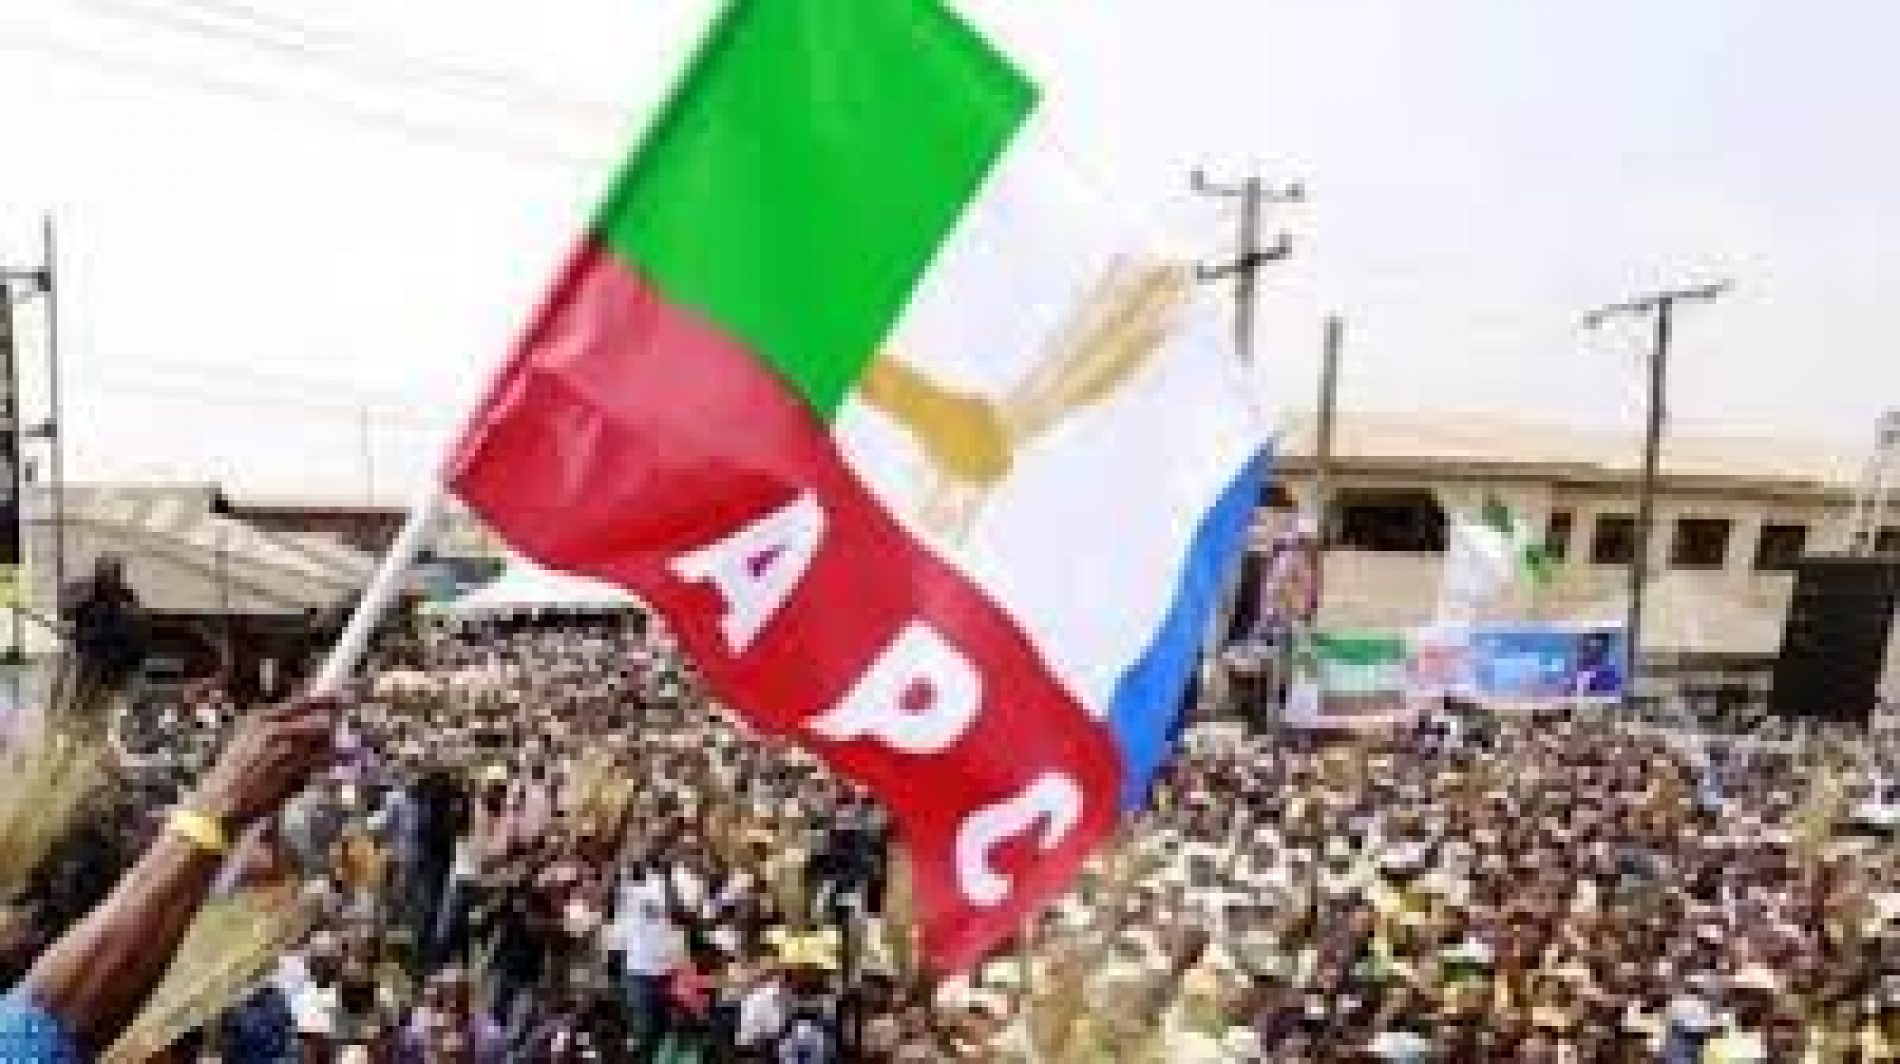 2023 Presidency: APC Group Makes Case For S’East … Sets Up Nationwide Structure